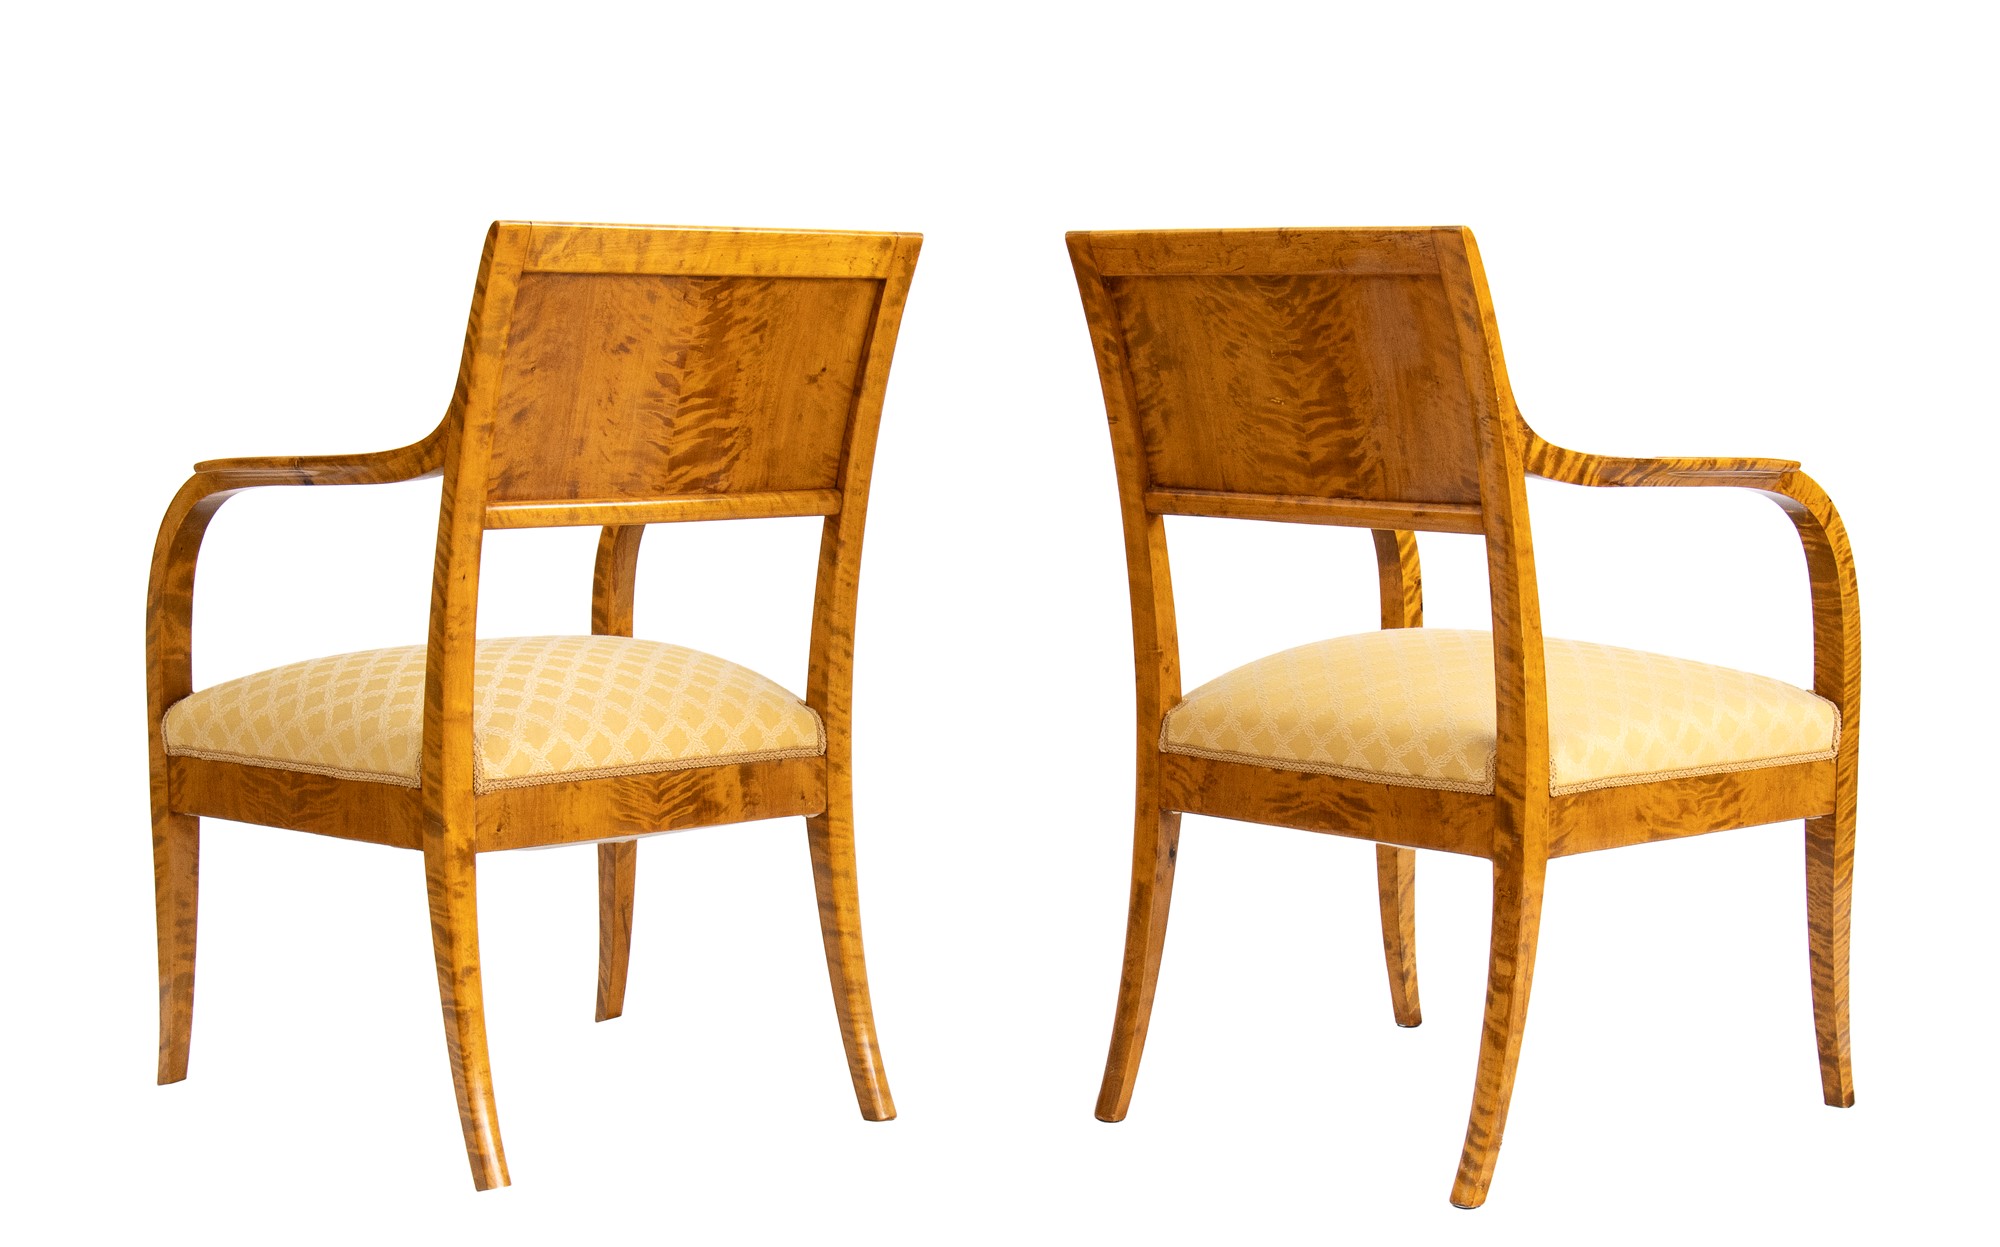 Pair of chairs Biedermeier with back carved in geometric decor with ebonized woods. - Image 16 of 19